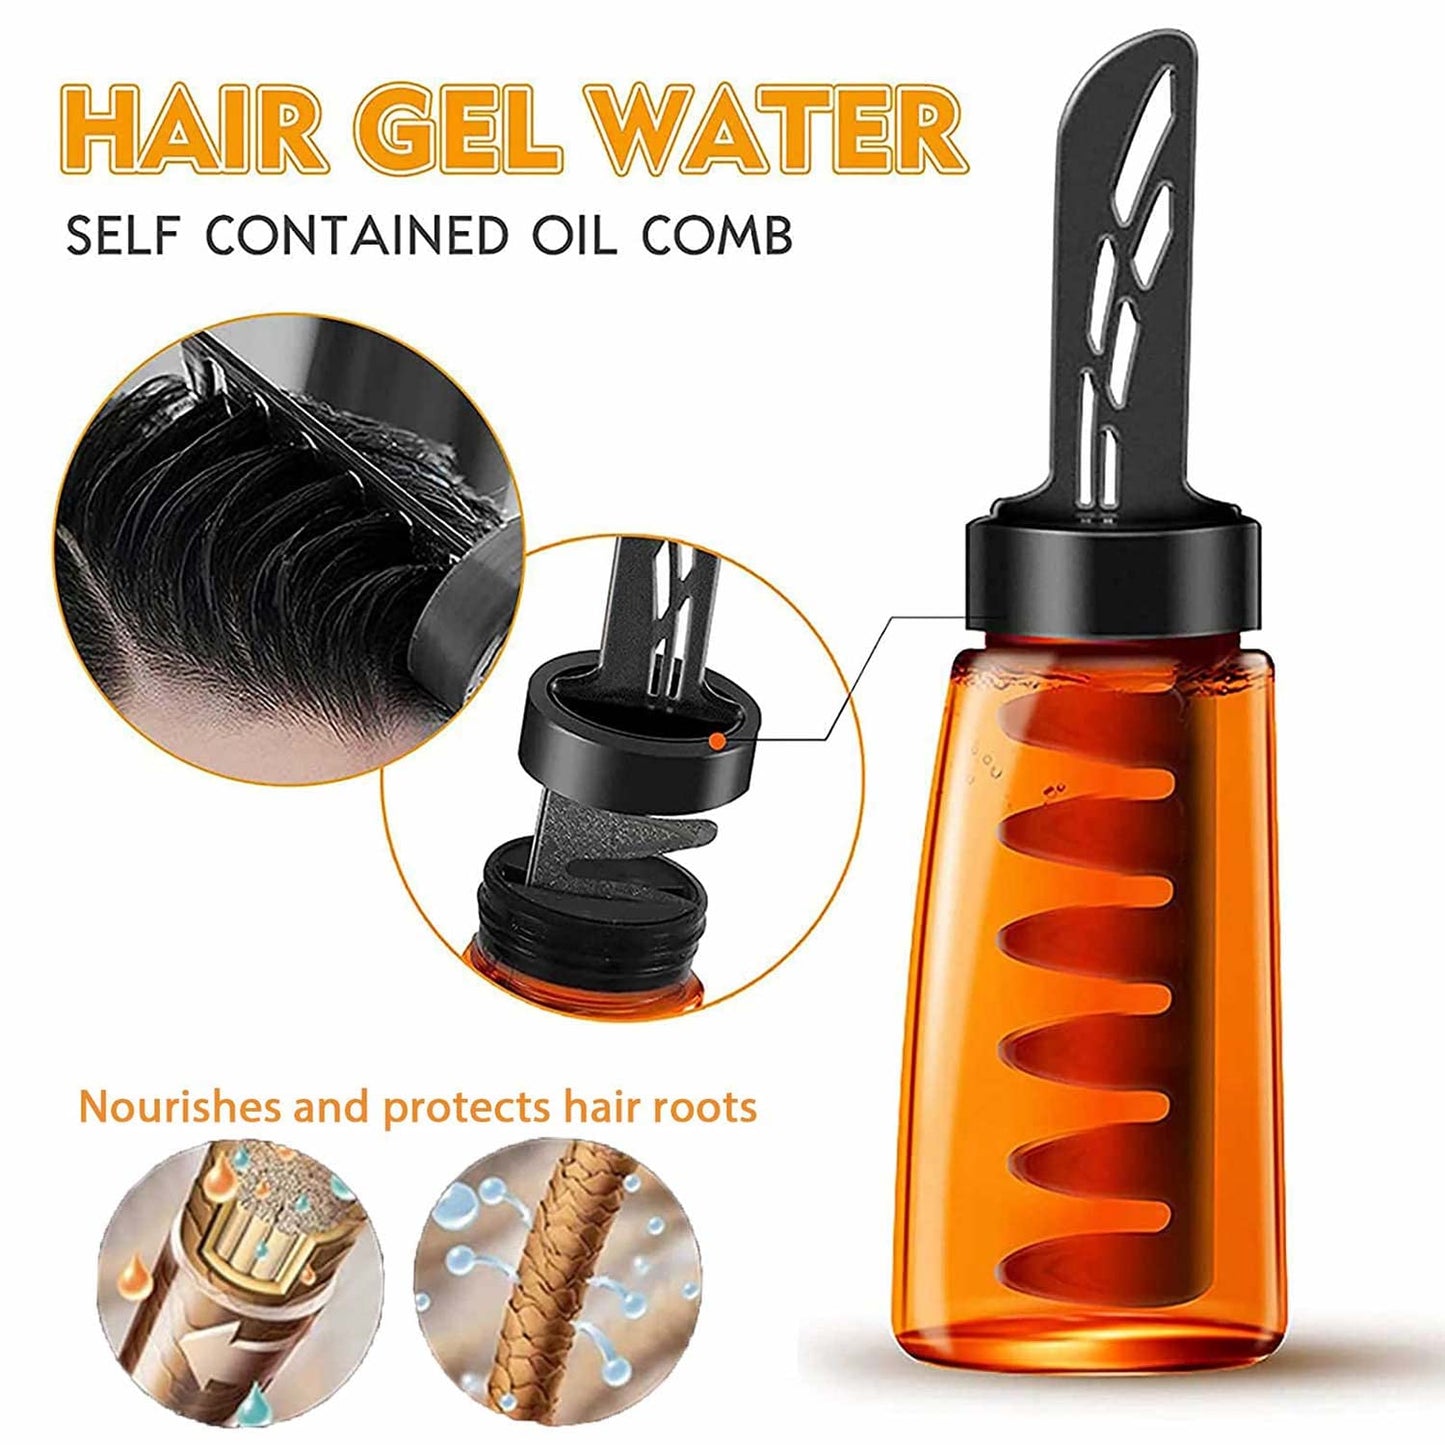 2-In-1 Hair Wax Gel With Comb